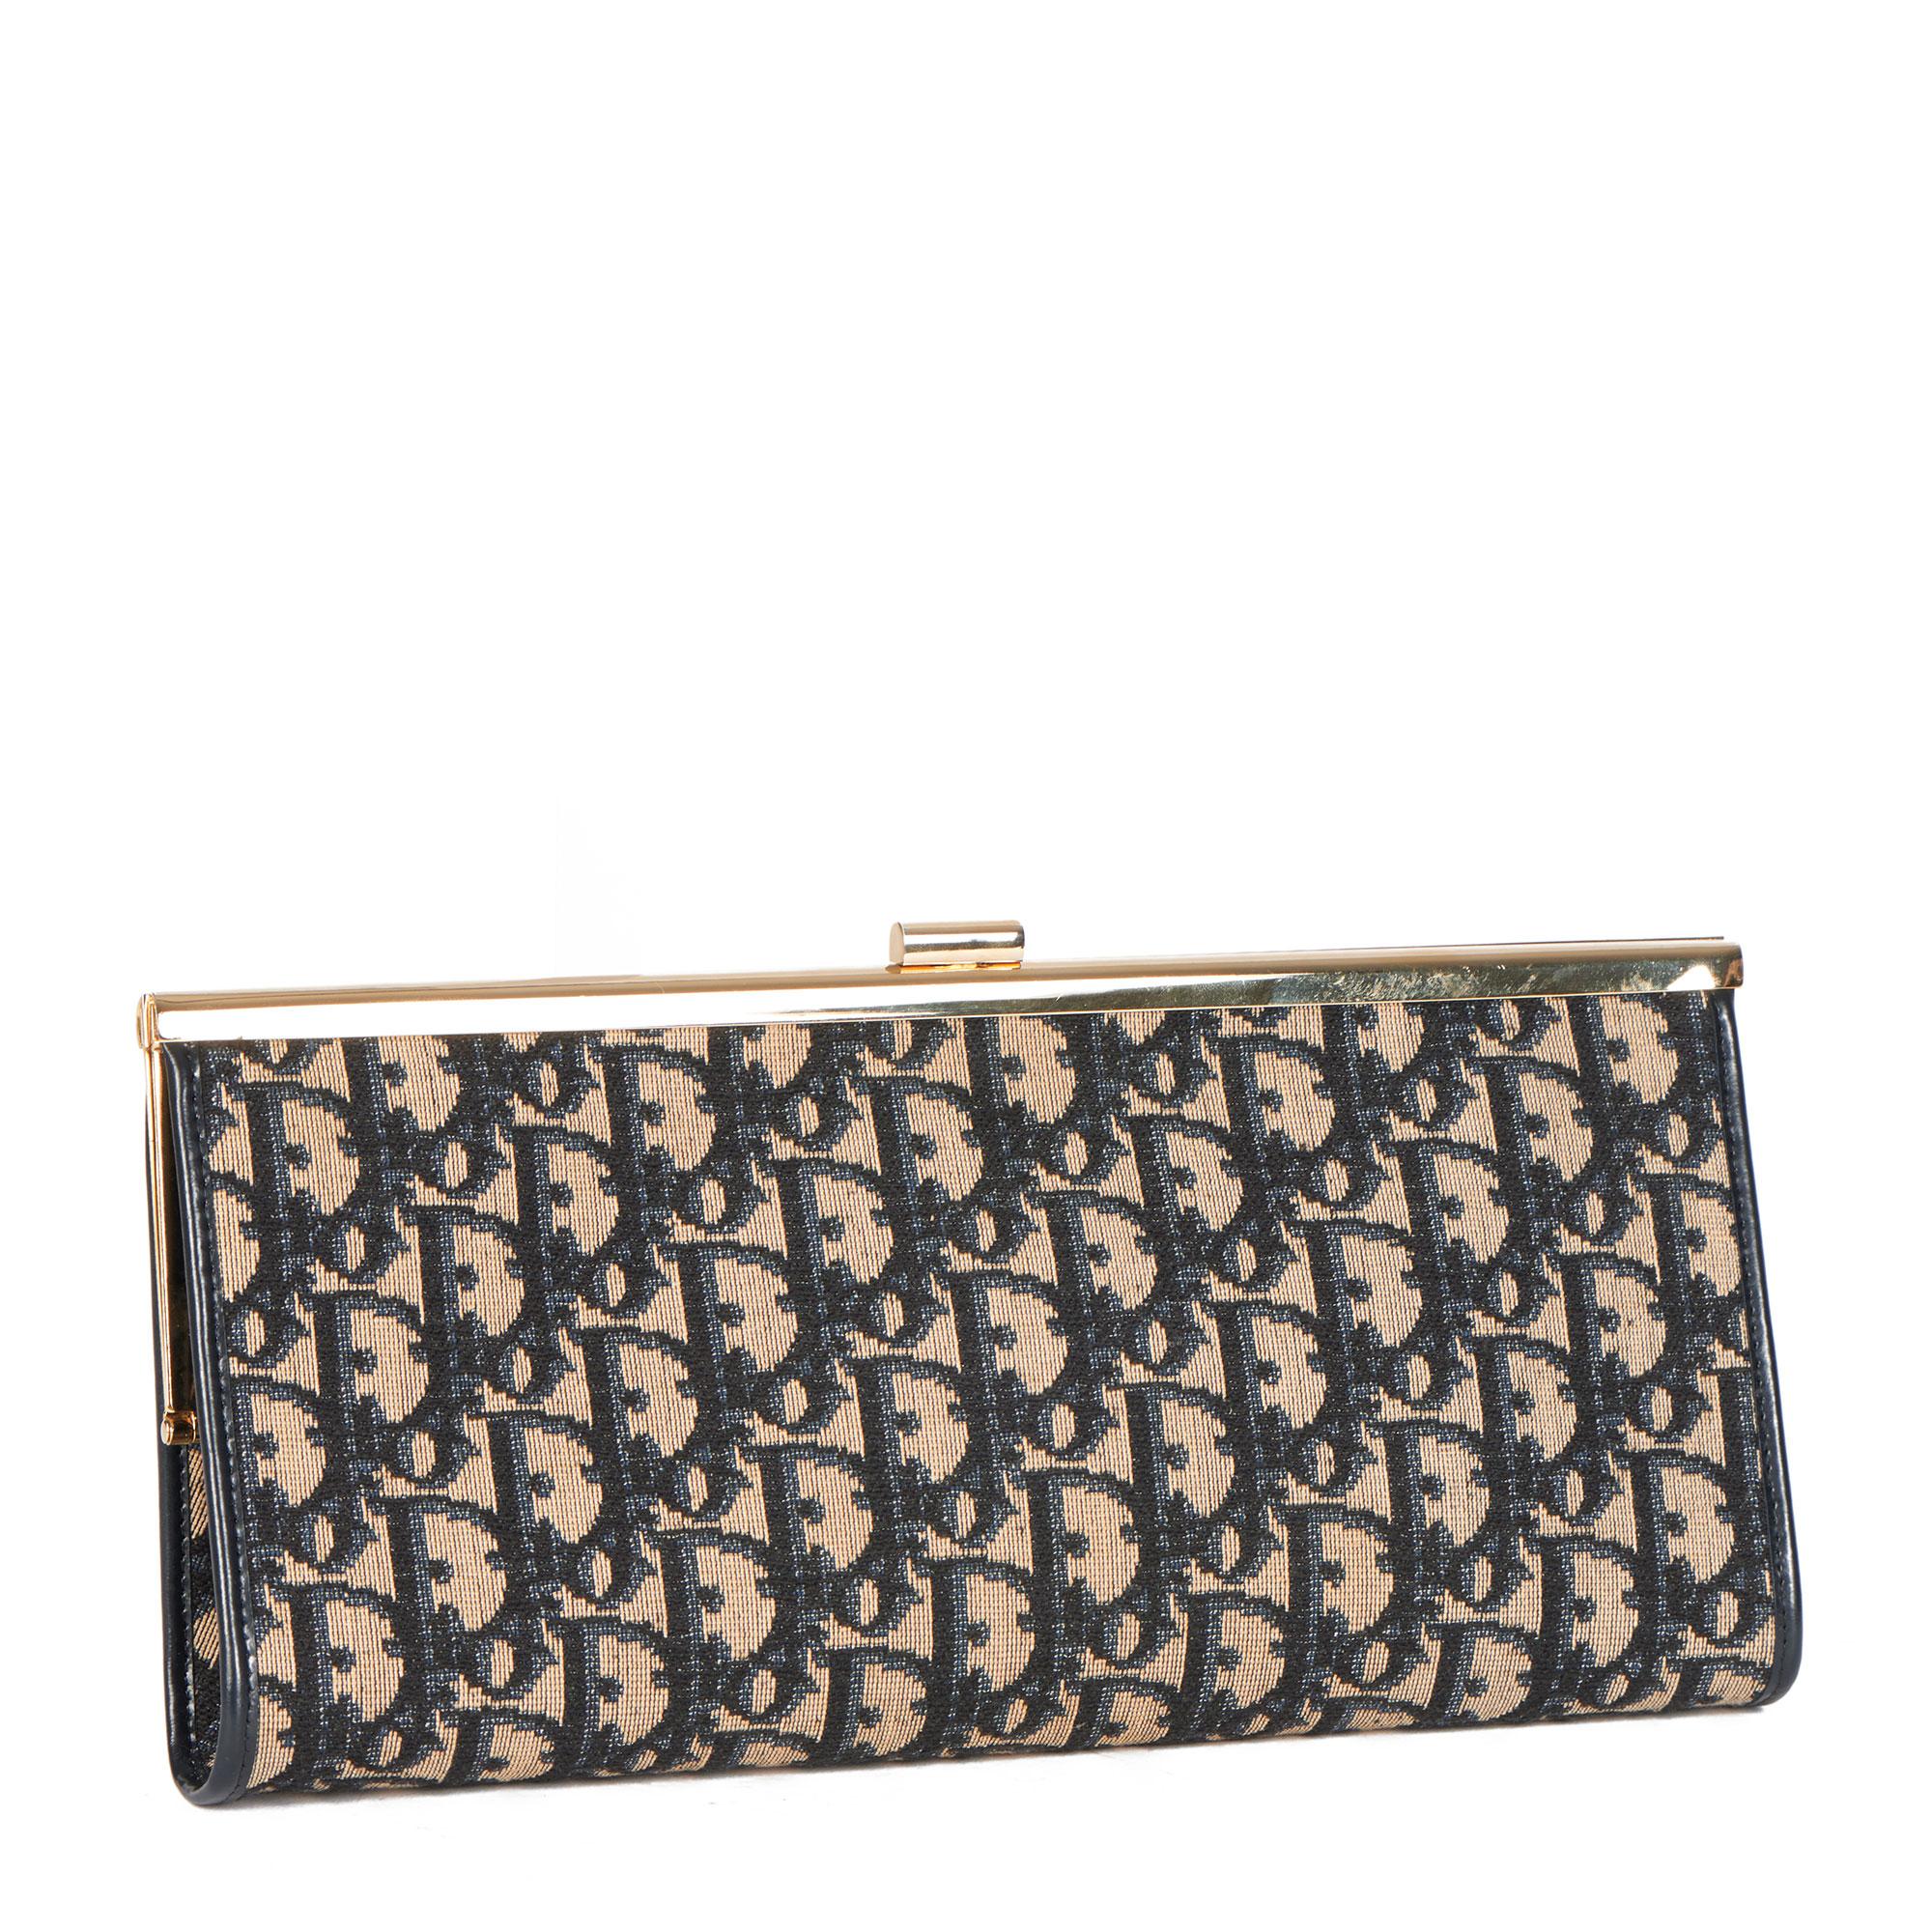 CHRISTIAN DIOR
Blue Oblique Monogram Canvas Vintage Clutch with Wallet

Xupes Reference: CB381
Serial Number: 
Age (Circa): 1990
Authenticity Details: (Made in France)
Gender: Ladies
Type: Clutch

Colour: Blue
Hardware: Gold
Material(s):